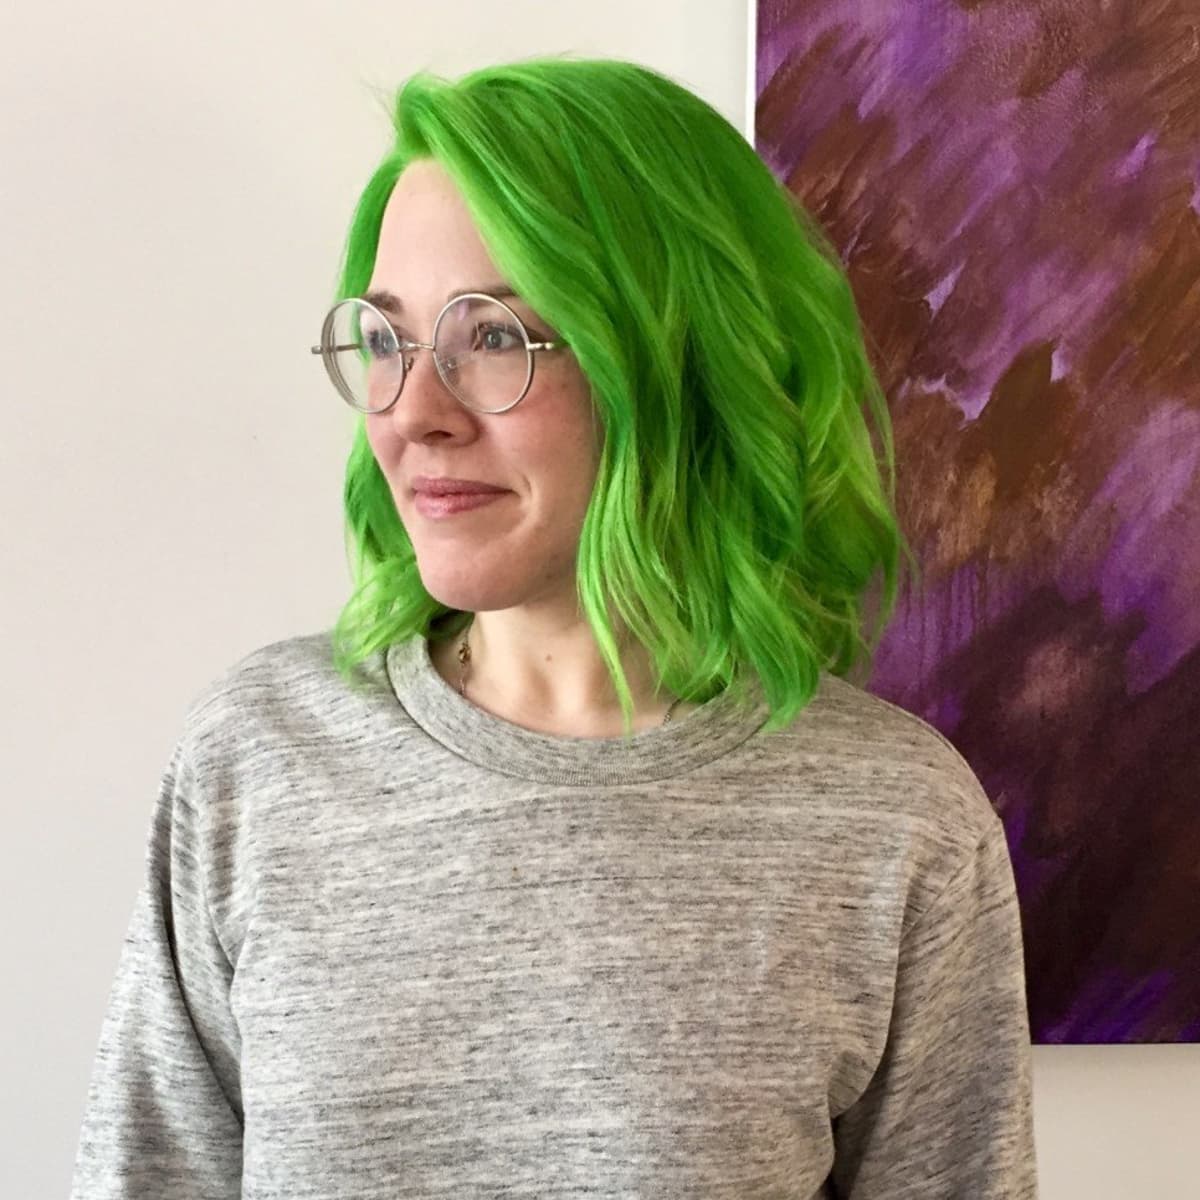 Hair DIY: 5 Ideas for Green Hair and How to Do Them at Home - Bellatory